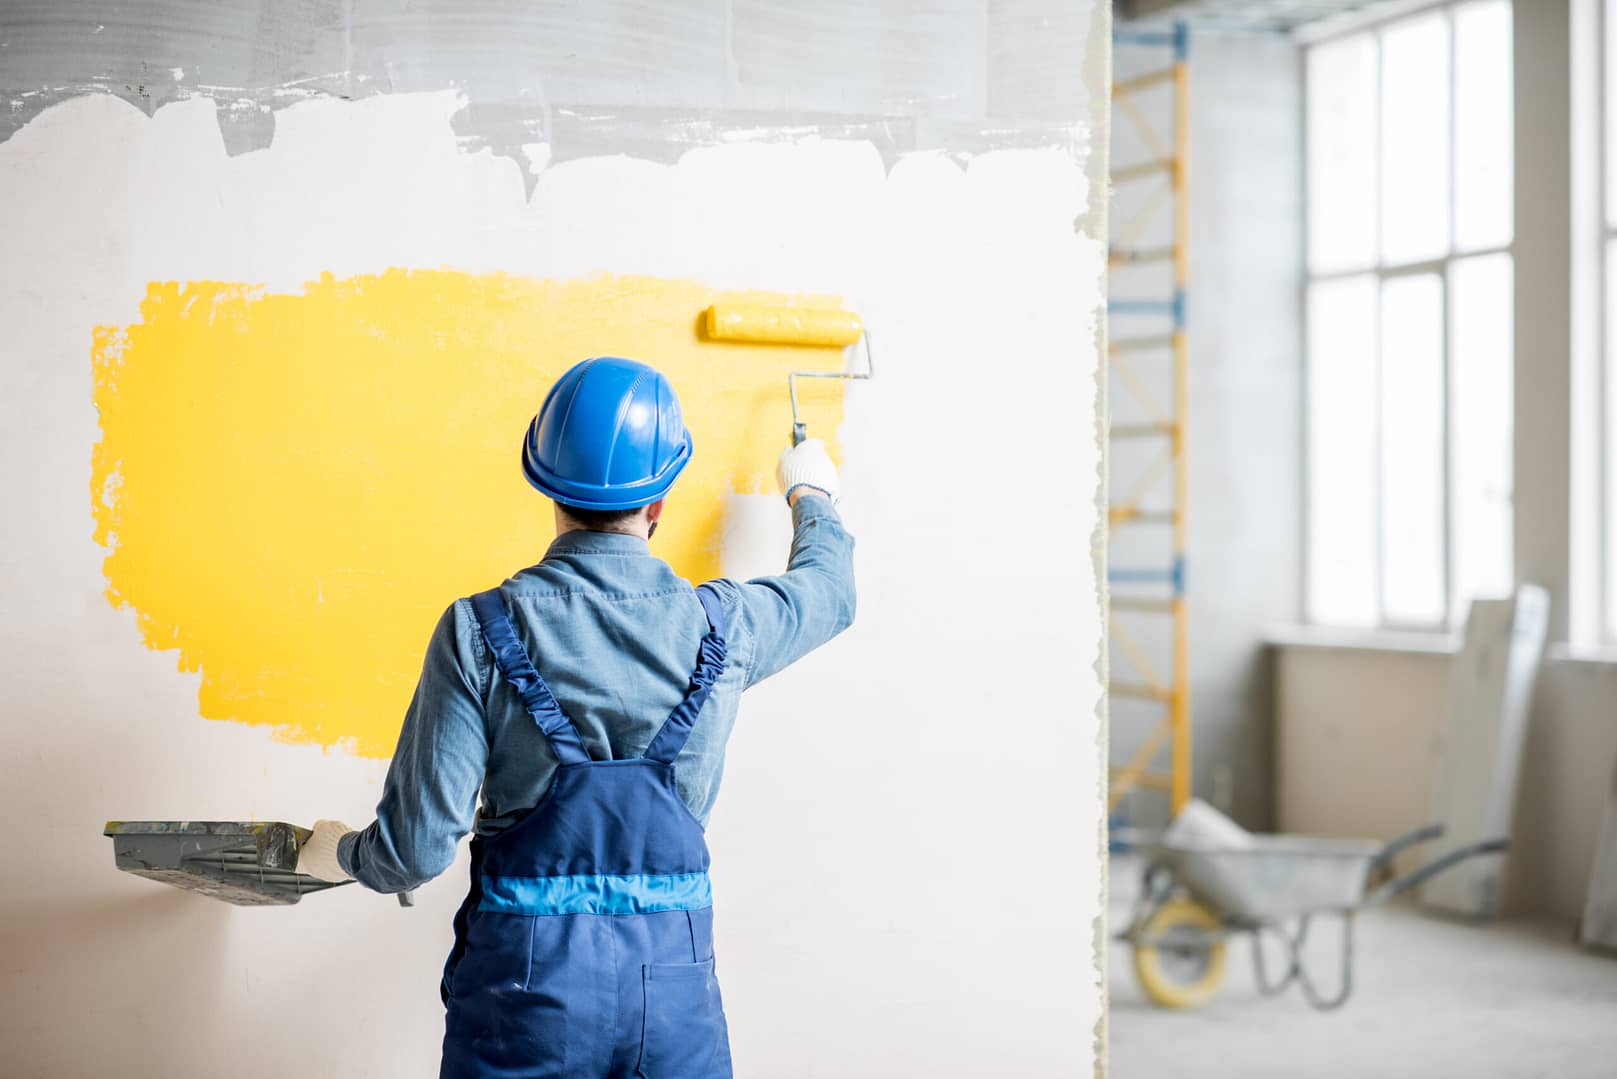 A worker in uniform diligently painting a wall with bright yellow paint.